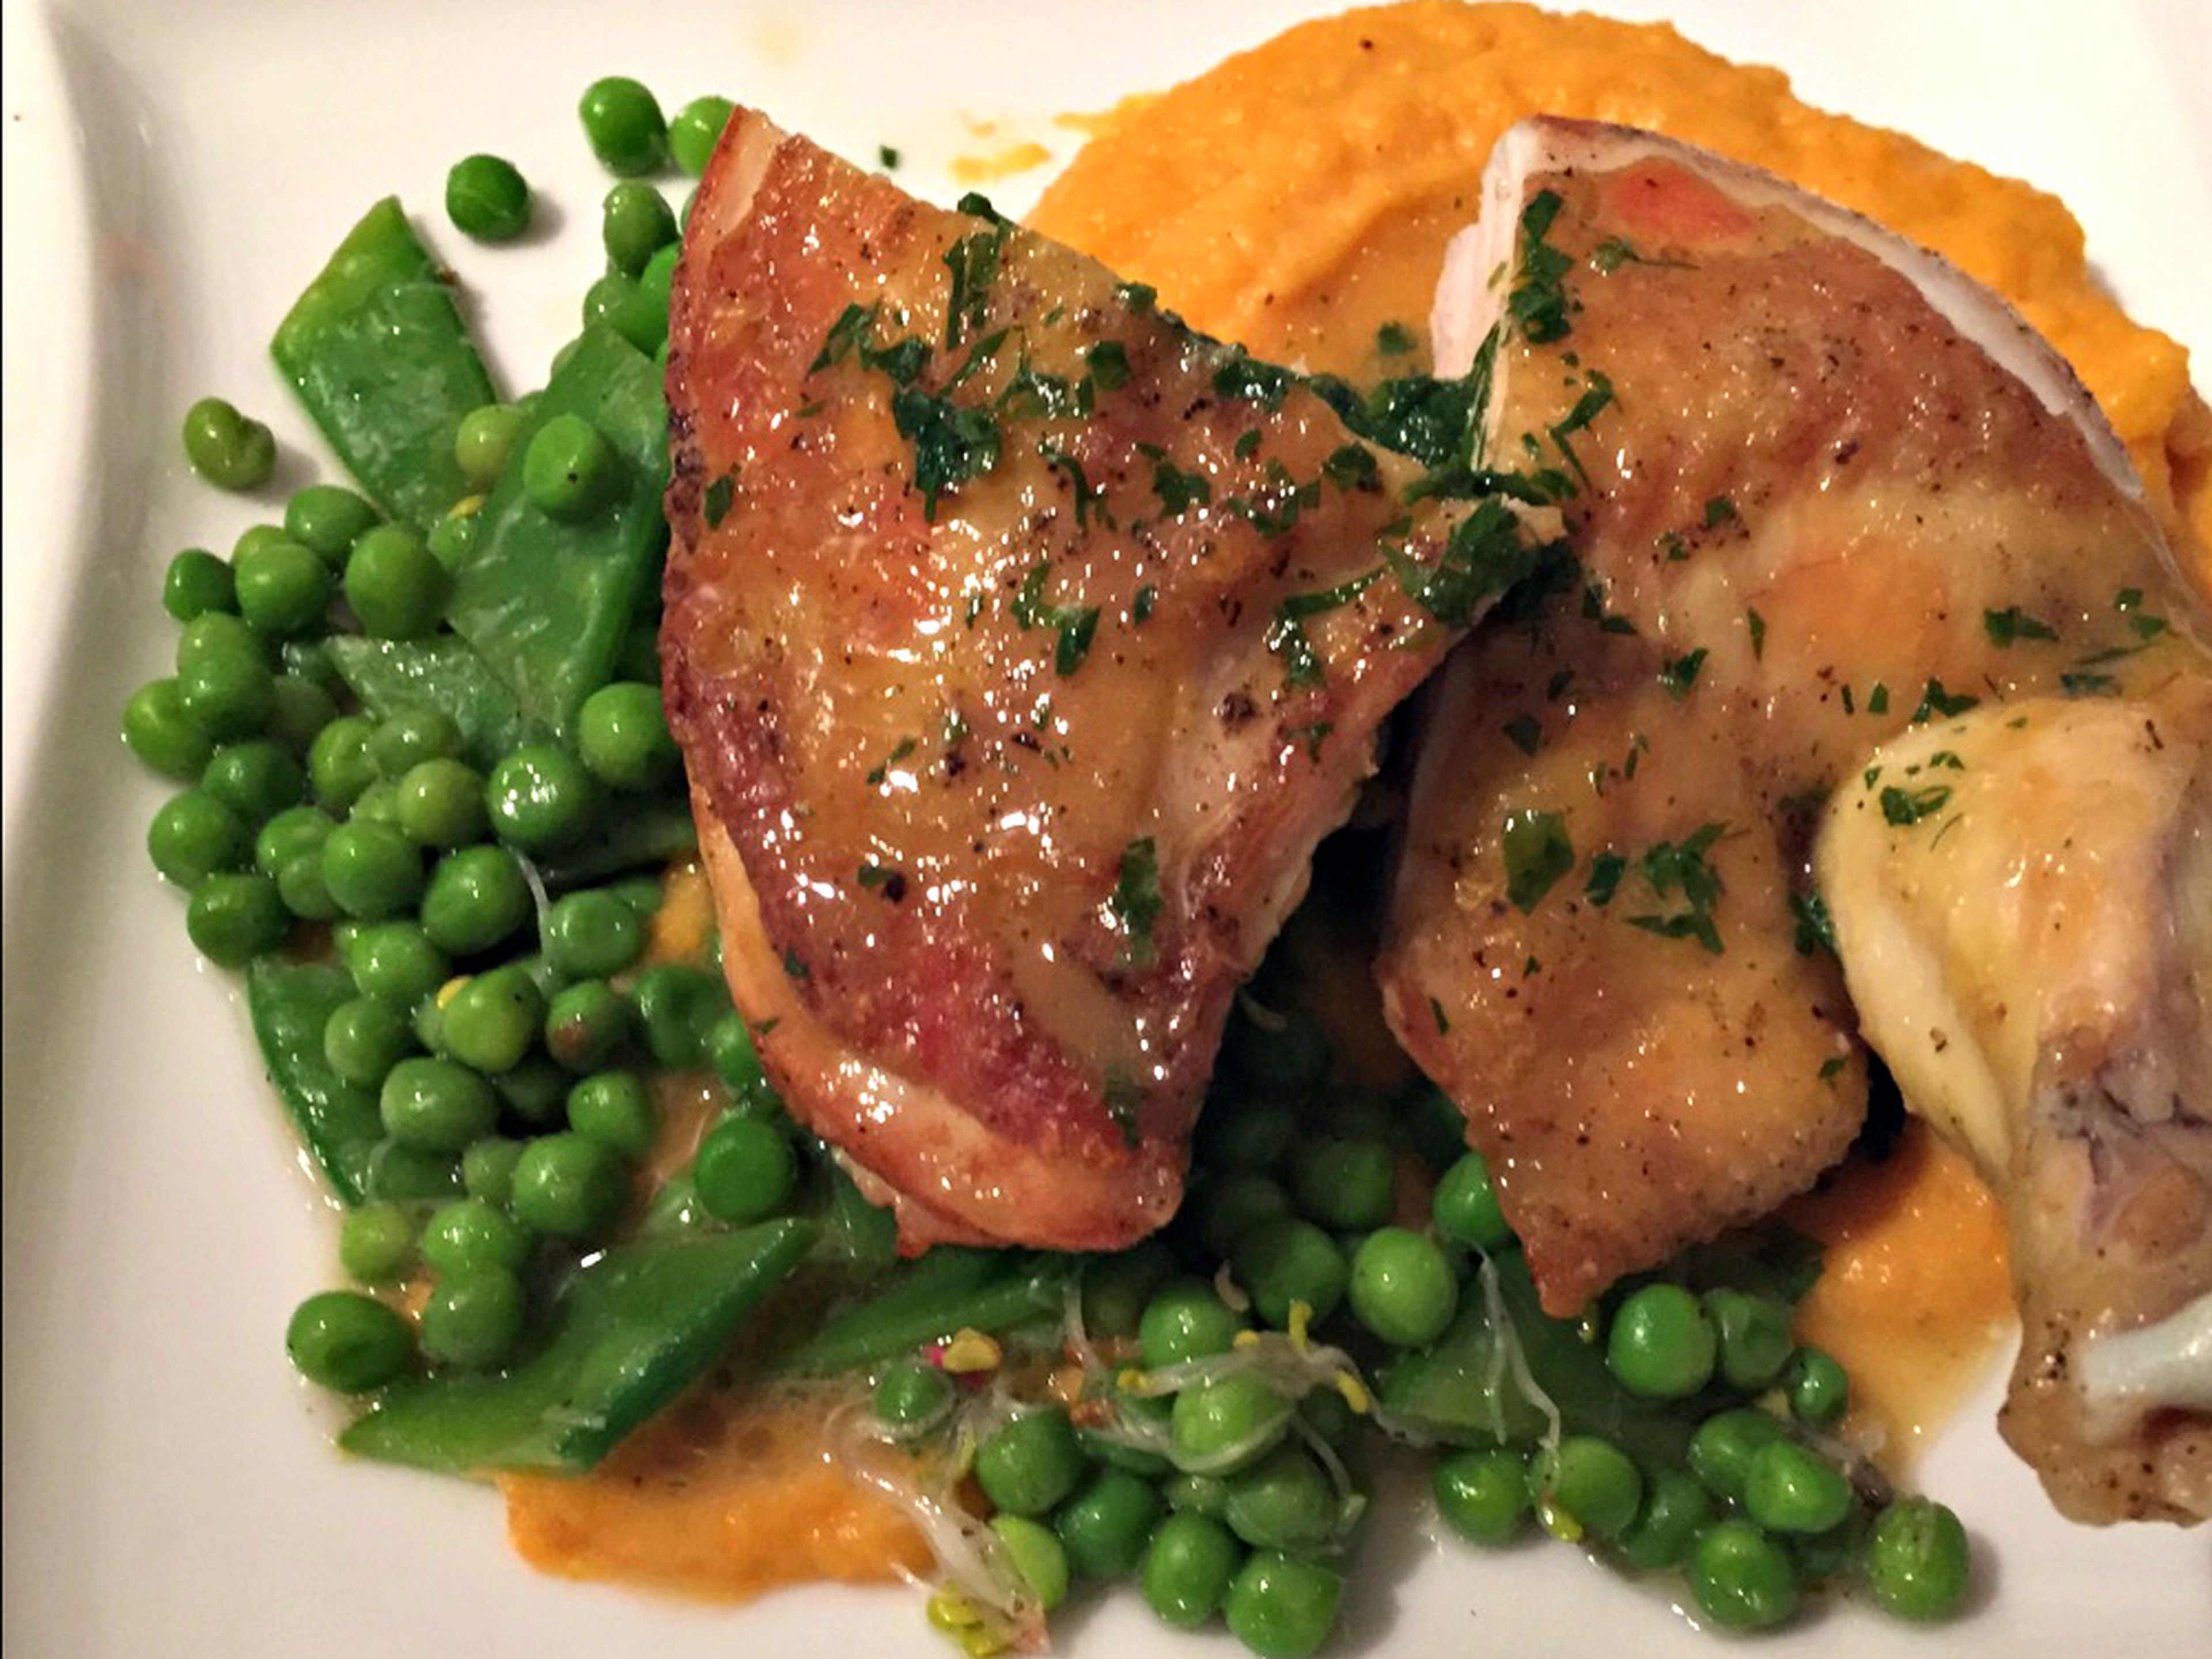 Corn-fed chicken breast with sweet potato purée